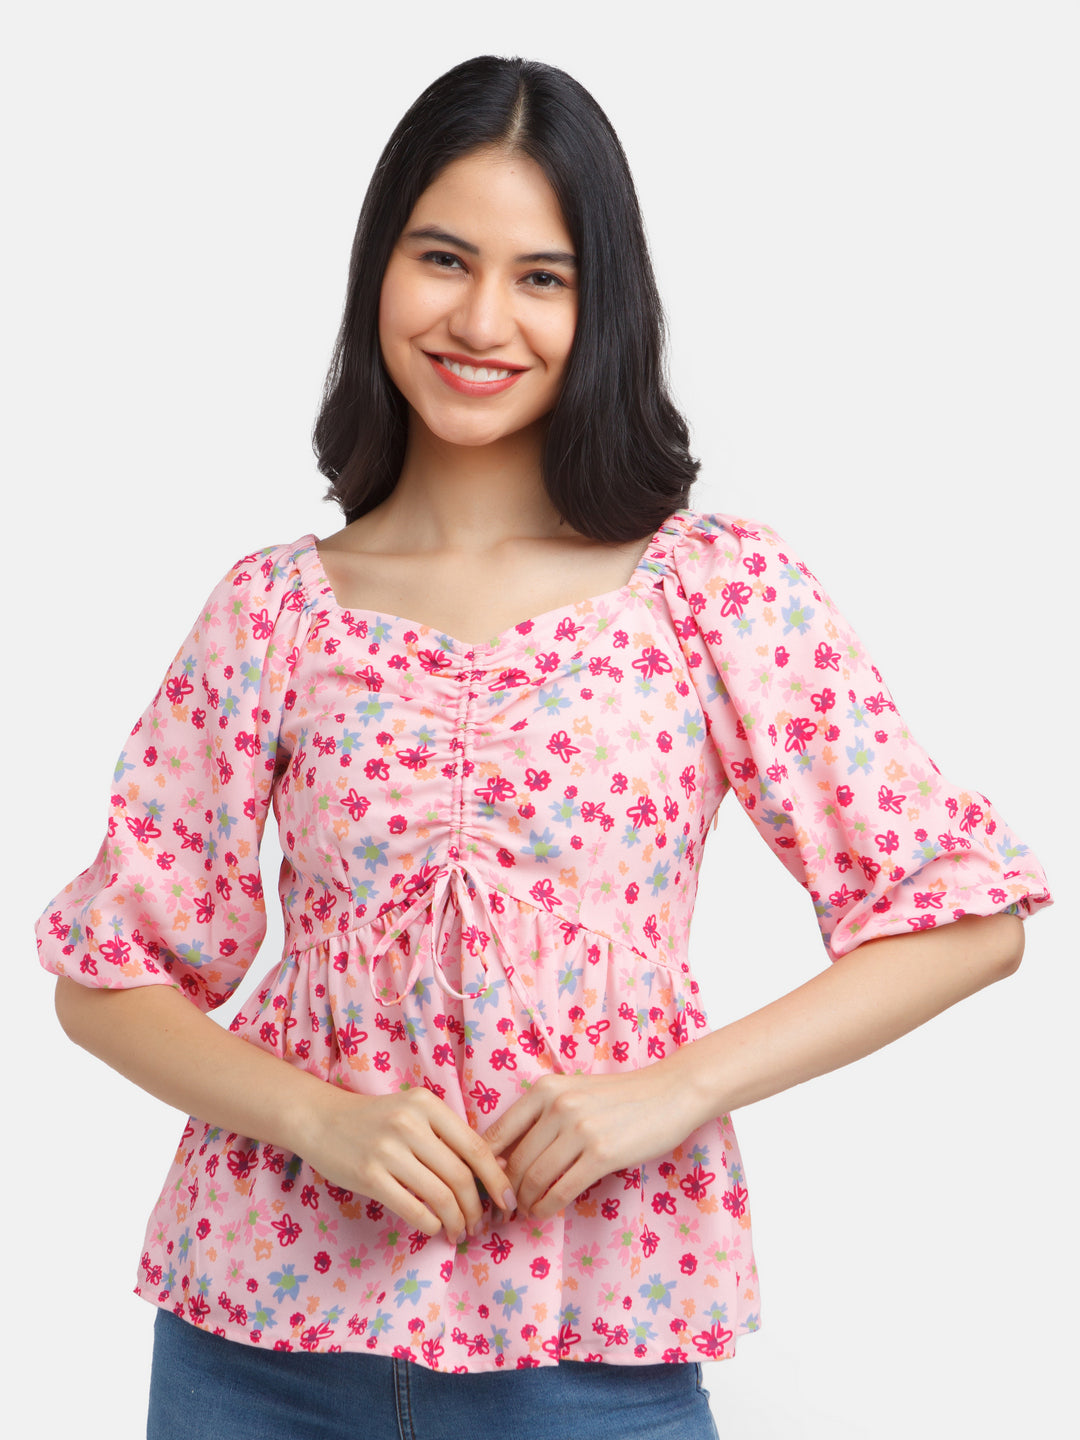 Multicolored Printed Ruched Top For Women